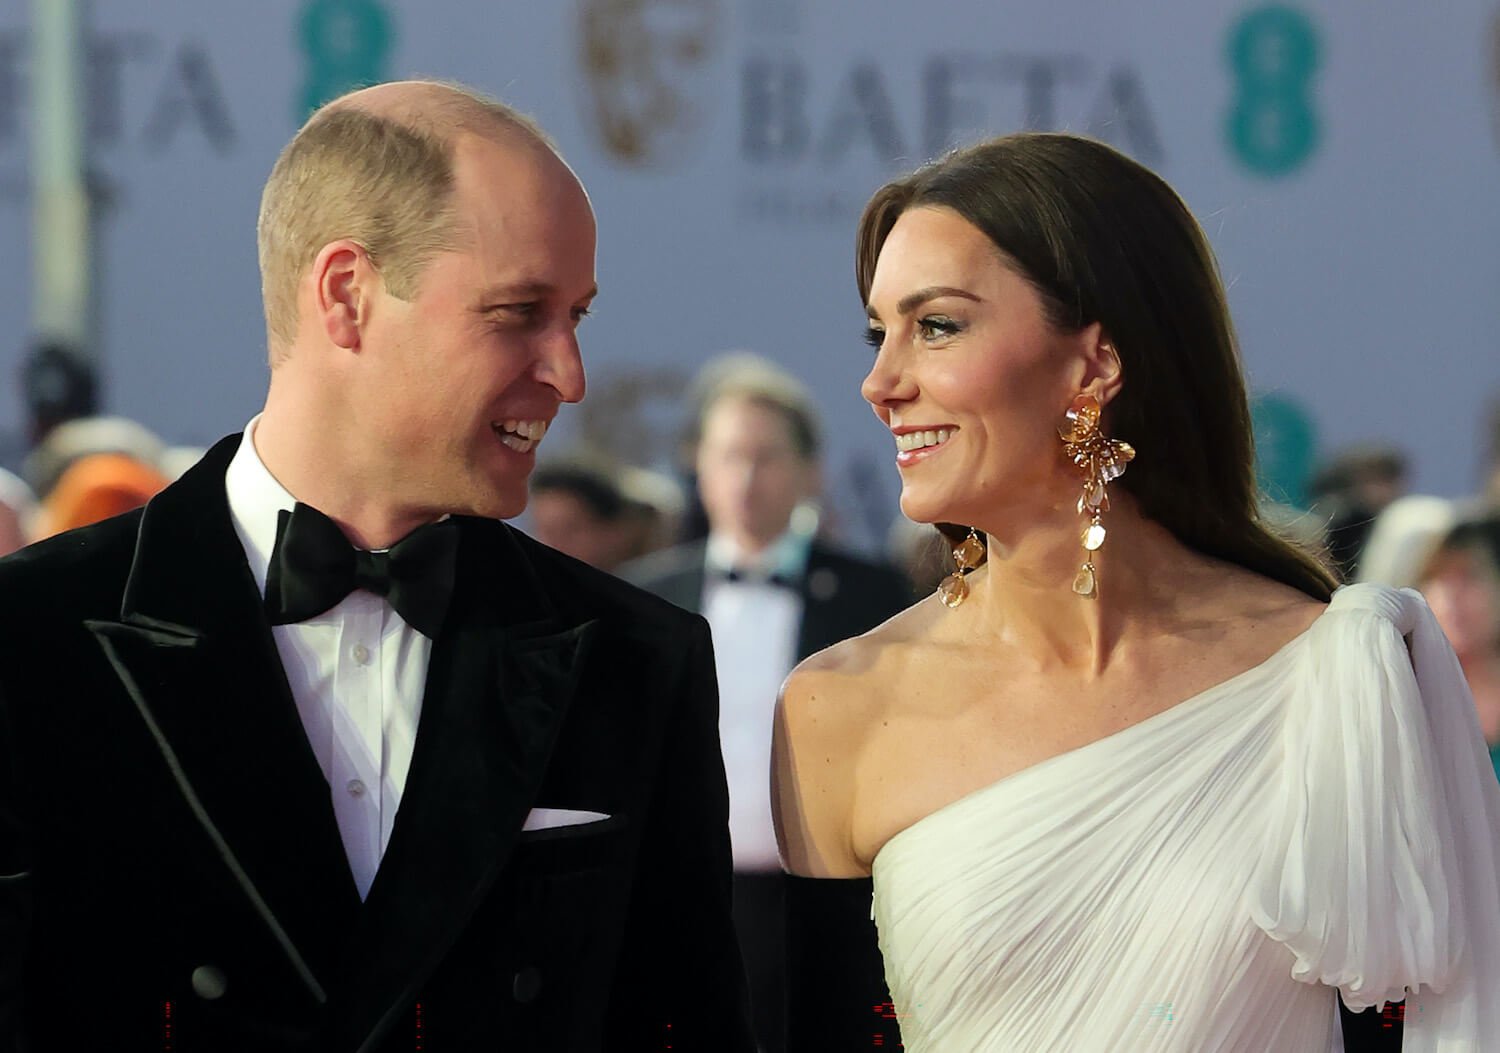 Prince William Is ‘Rubik’s Cube Type of Husband’ Who Has Learned From ‘Mistakes of History,’ Body Language Expert Says